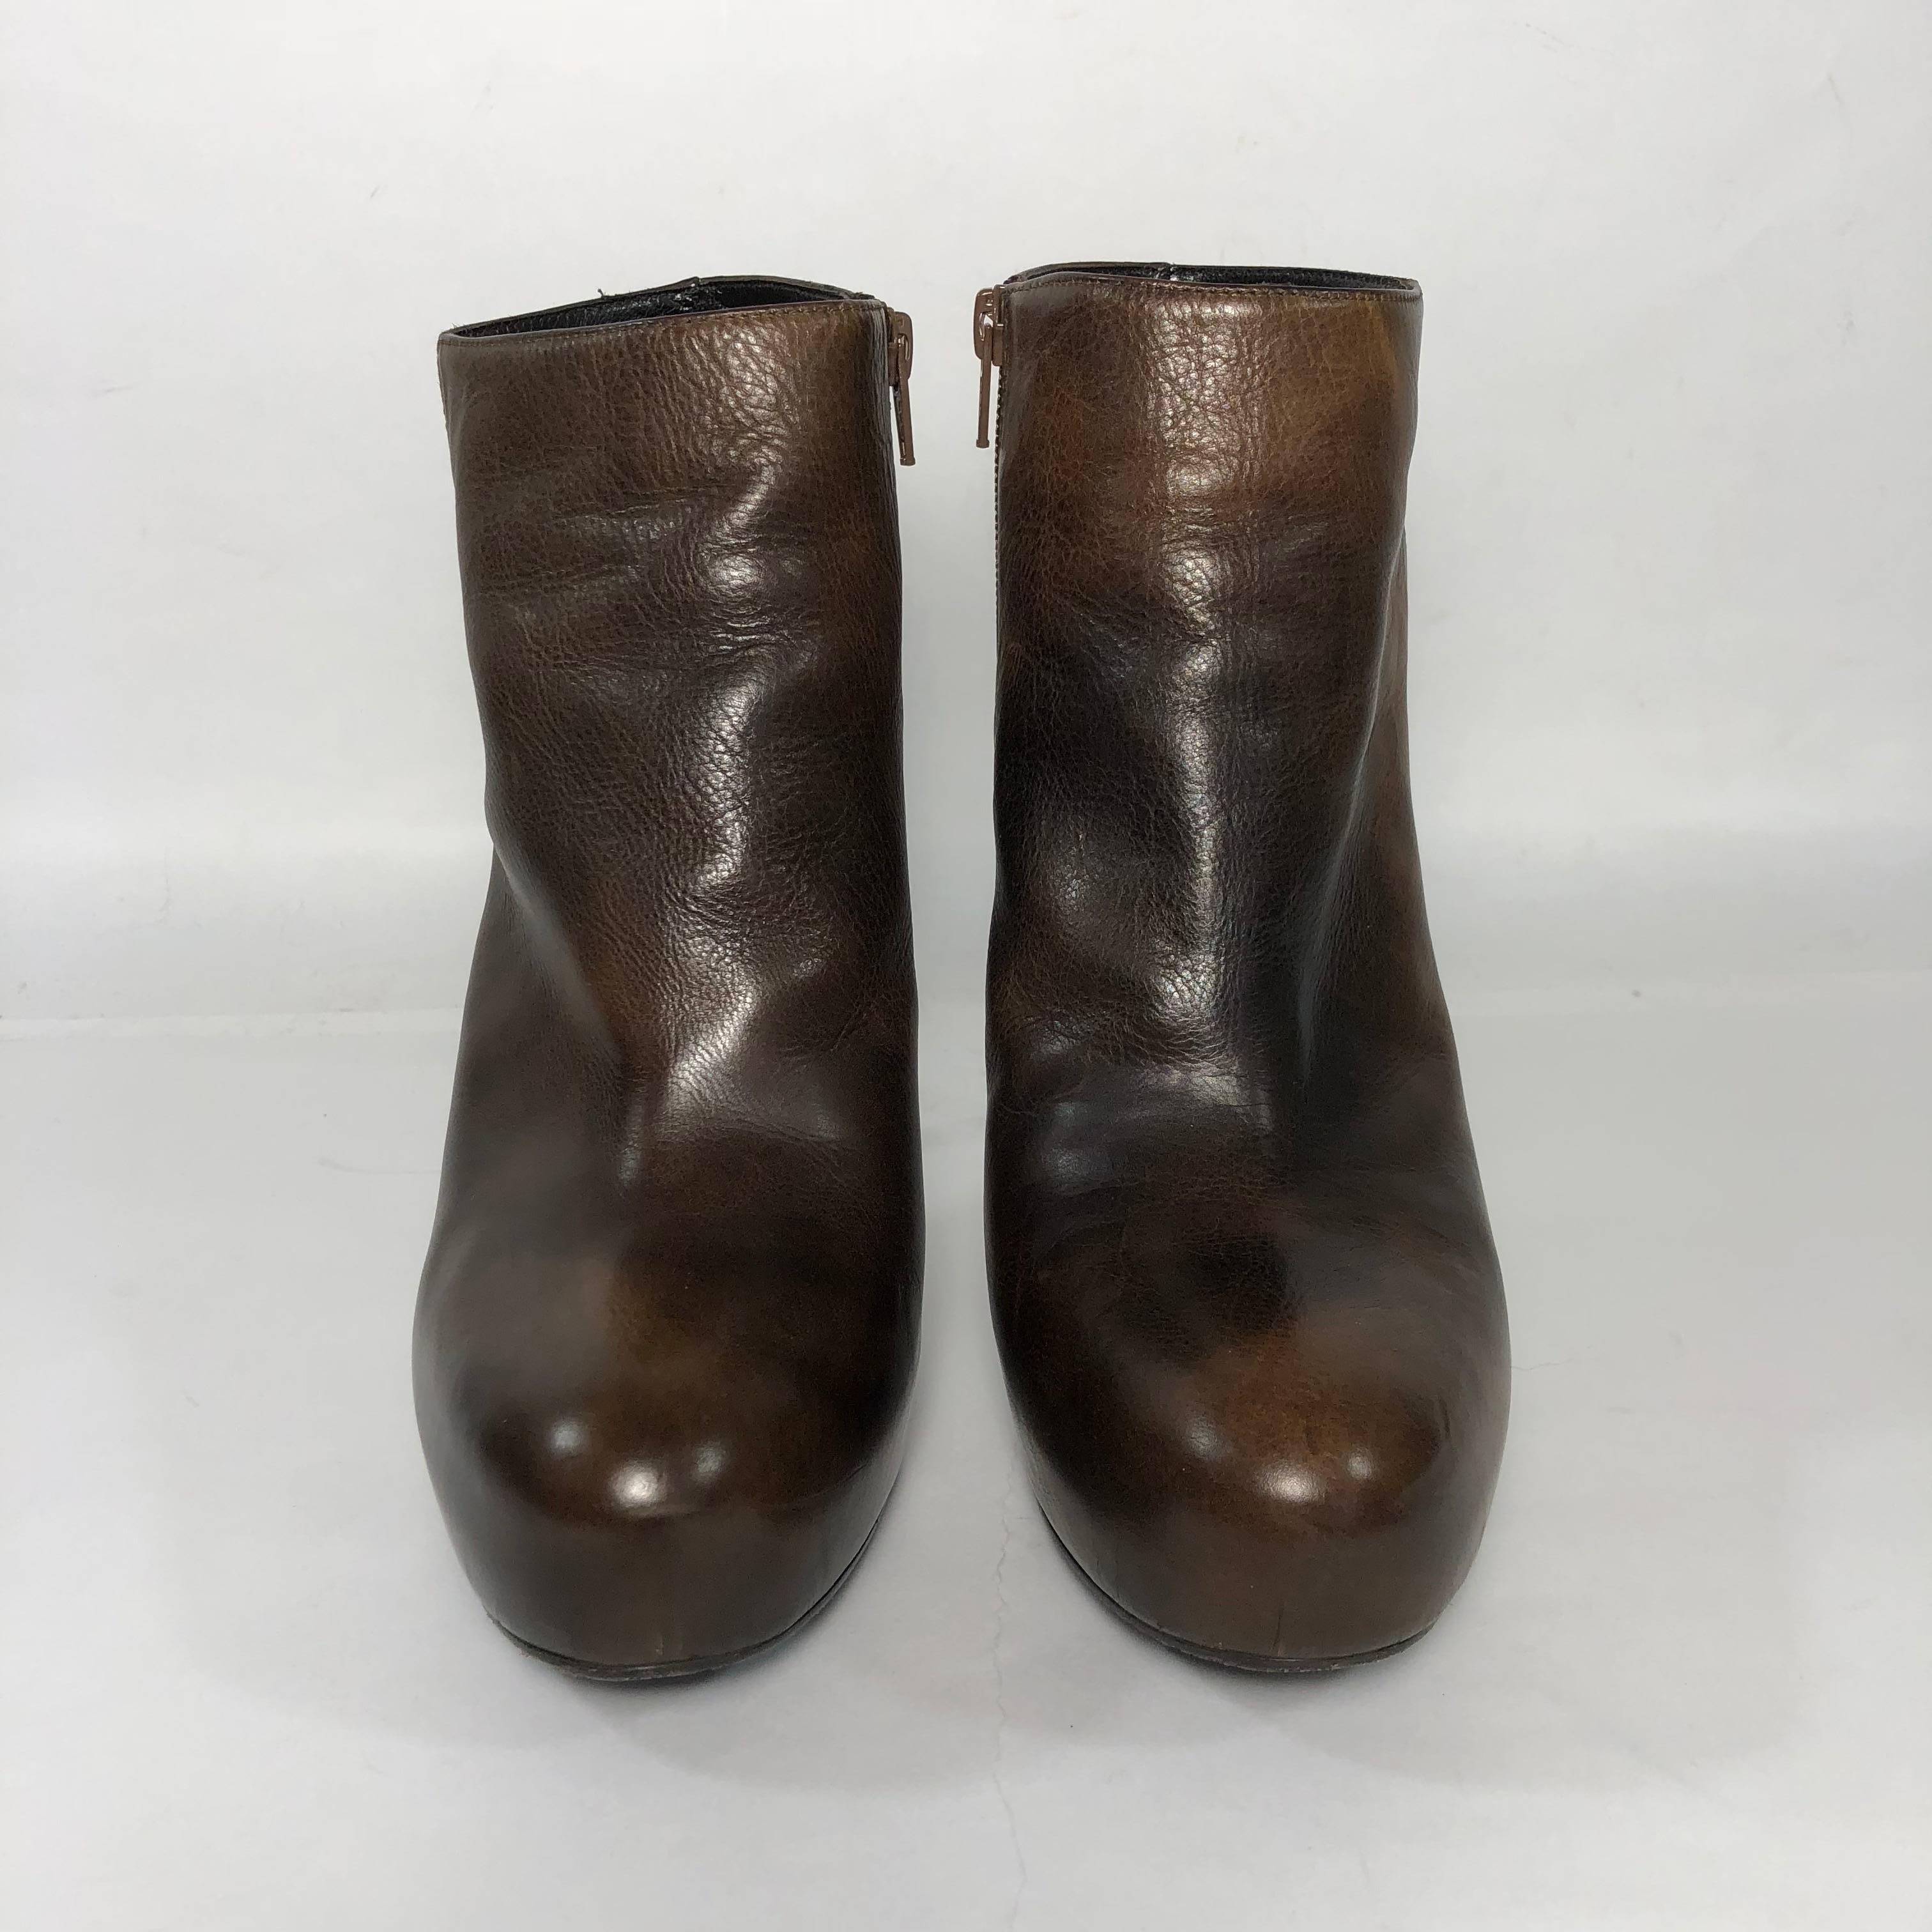 MODEL - Stuart Weitzman Stiletto Ankle Boot Platform in Burnished Brown Leather

CONDITION - New!  Never Worn.

SKU - 2161

ORIGINAL RETAIL PRICE - 795 + tax

SIZE - 9.5

MATERIAL - Leather

HEEL HEIGHT - 5 inches

INTERIOR SOLE MEASURE - 11